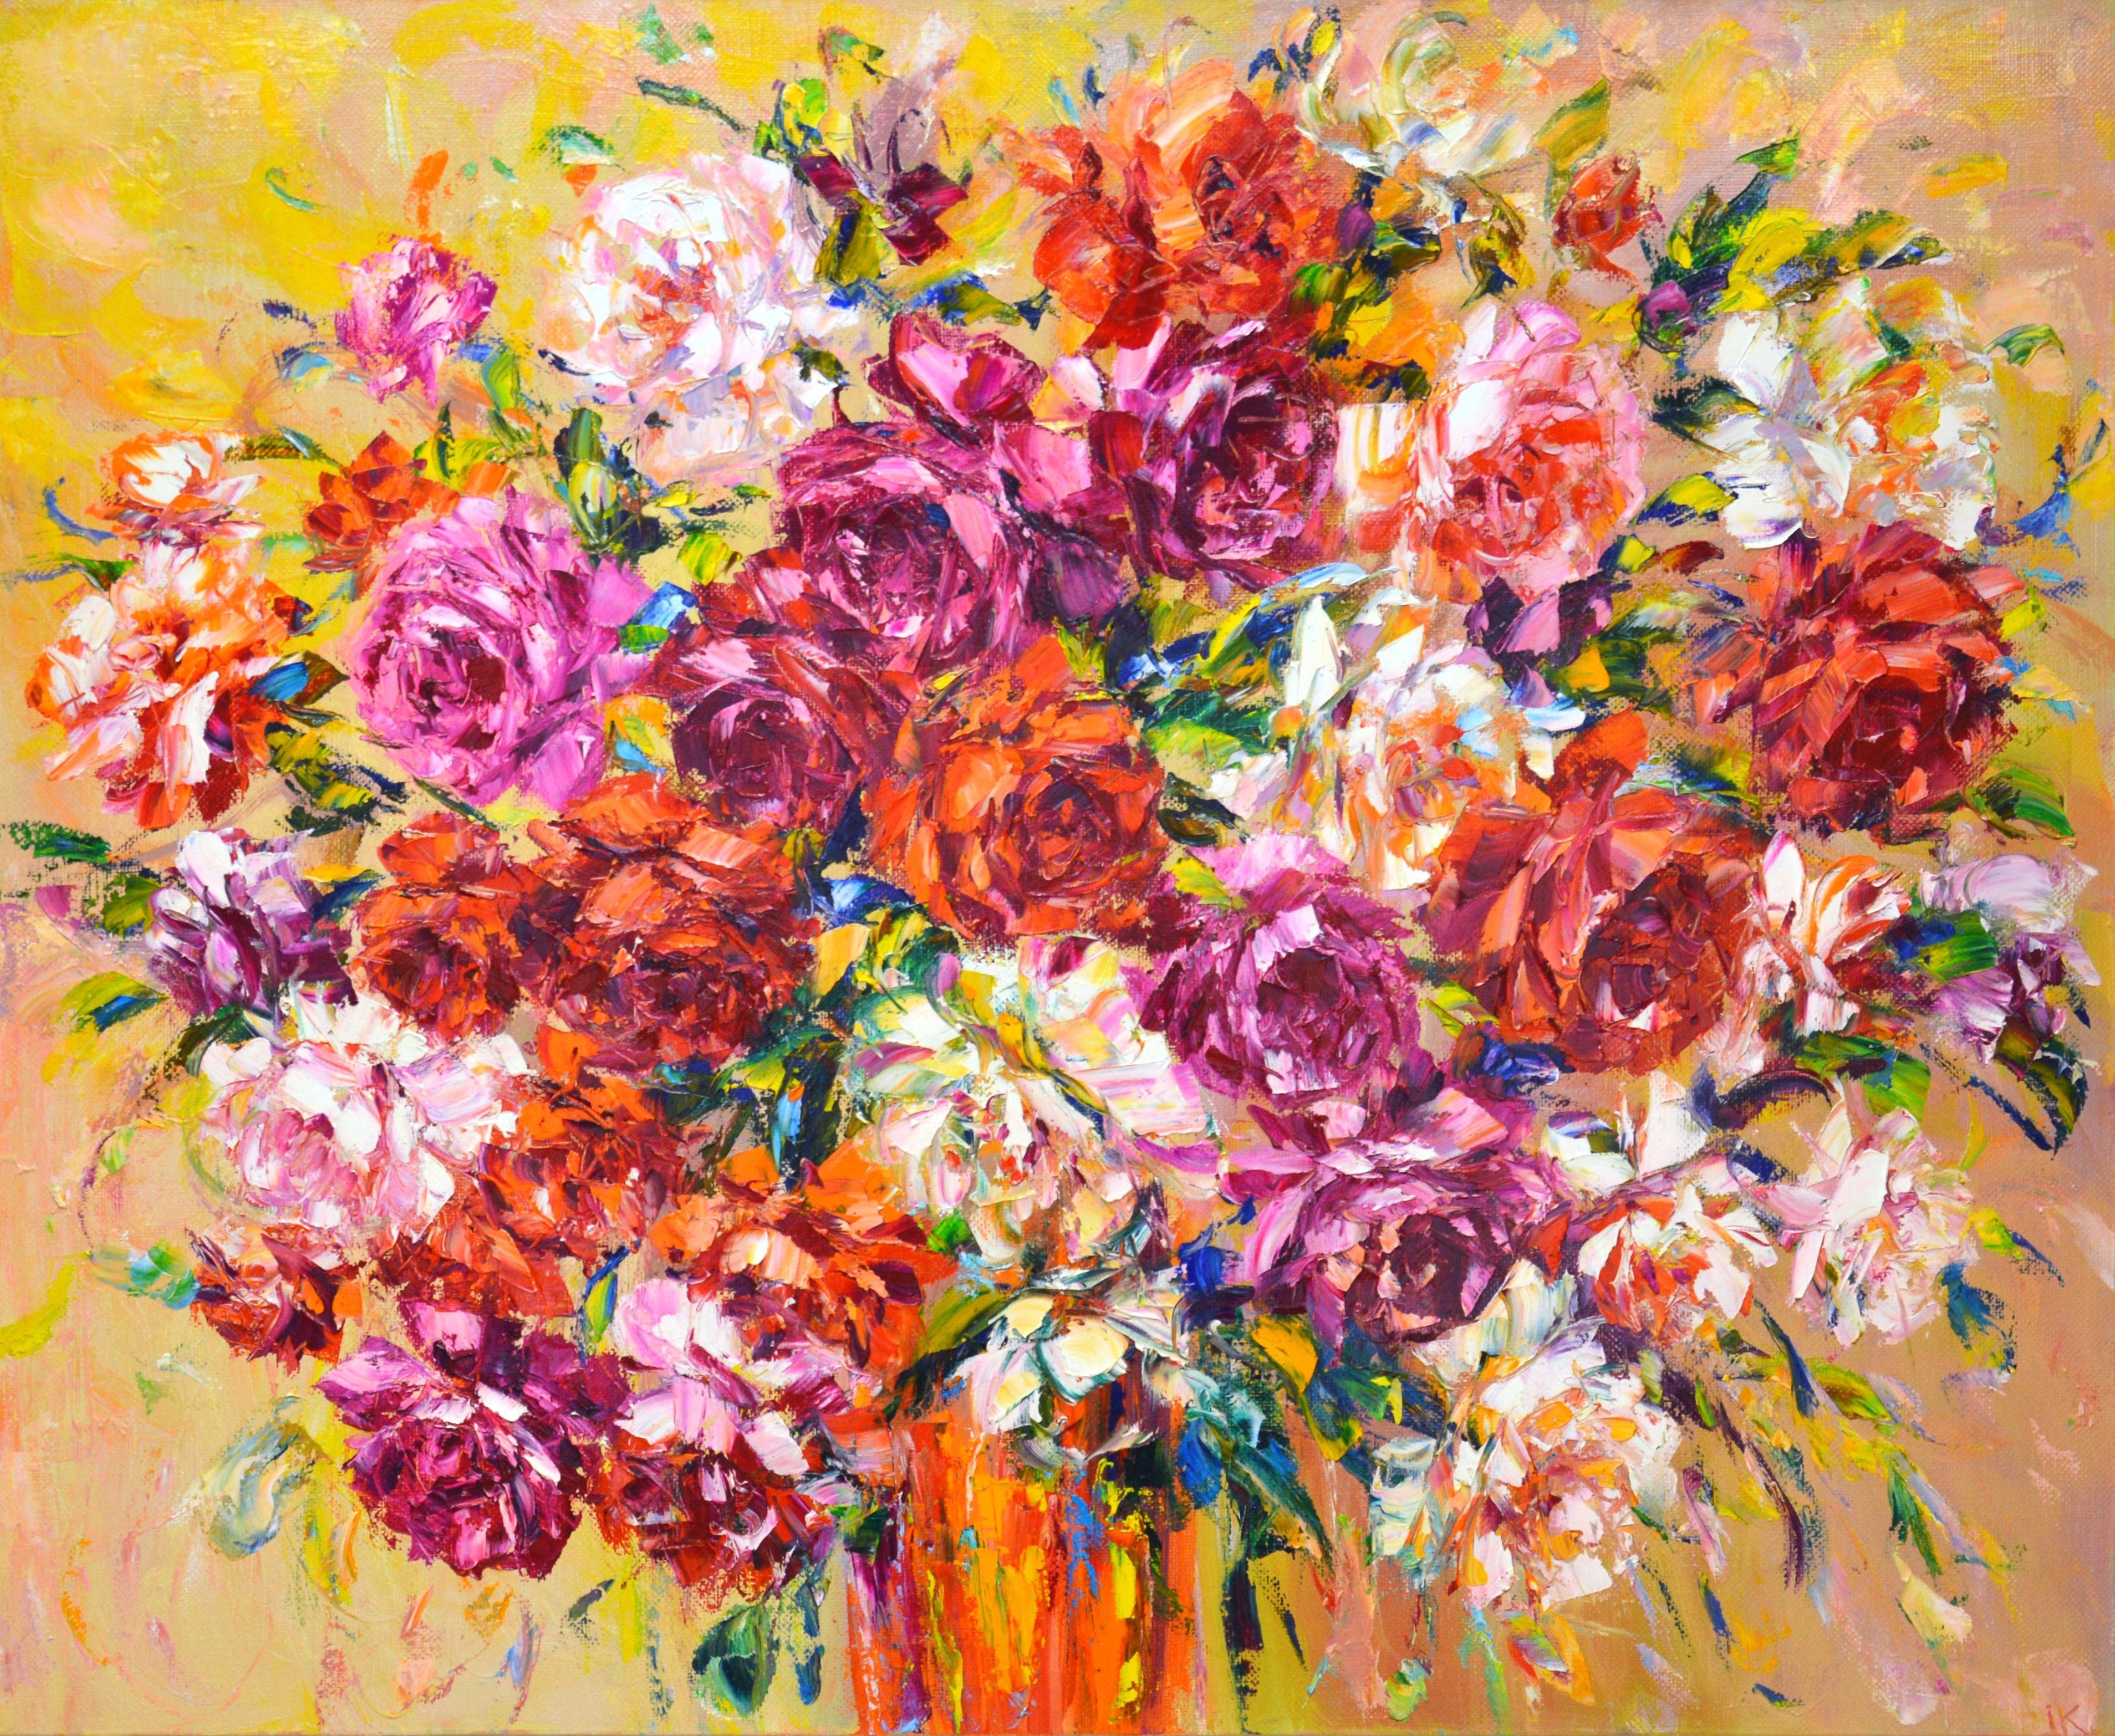 Roses for good luck. Roses: white, pink, red on an abstract gentle background. Impressionism. Made with a textured brush and palette knife to quickly convey a mood, a vivid impression. Part of a permanent series of floral still lifes. Inspired by